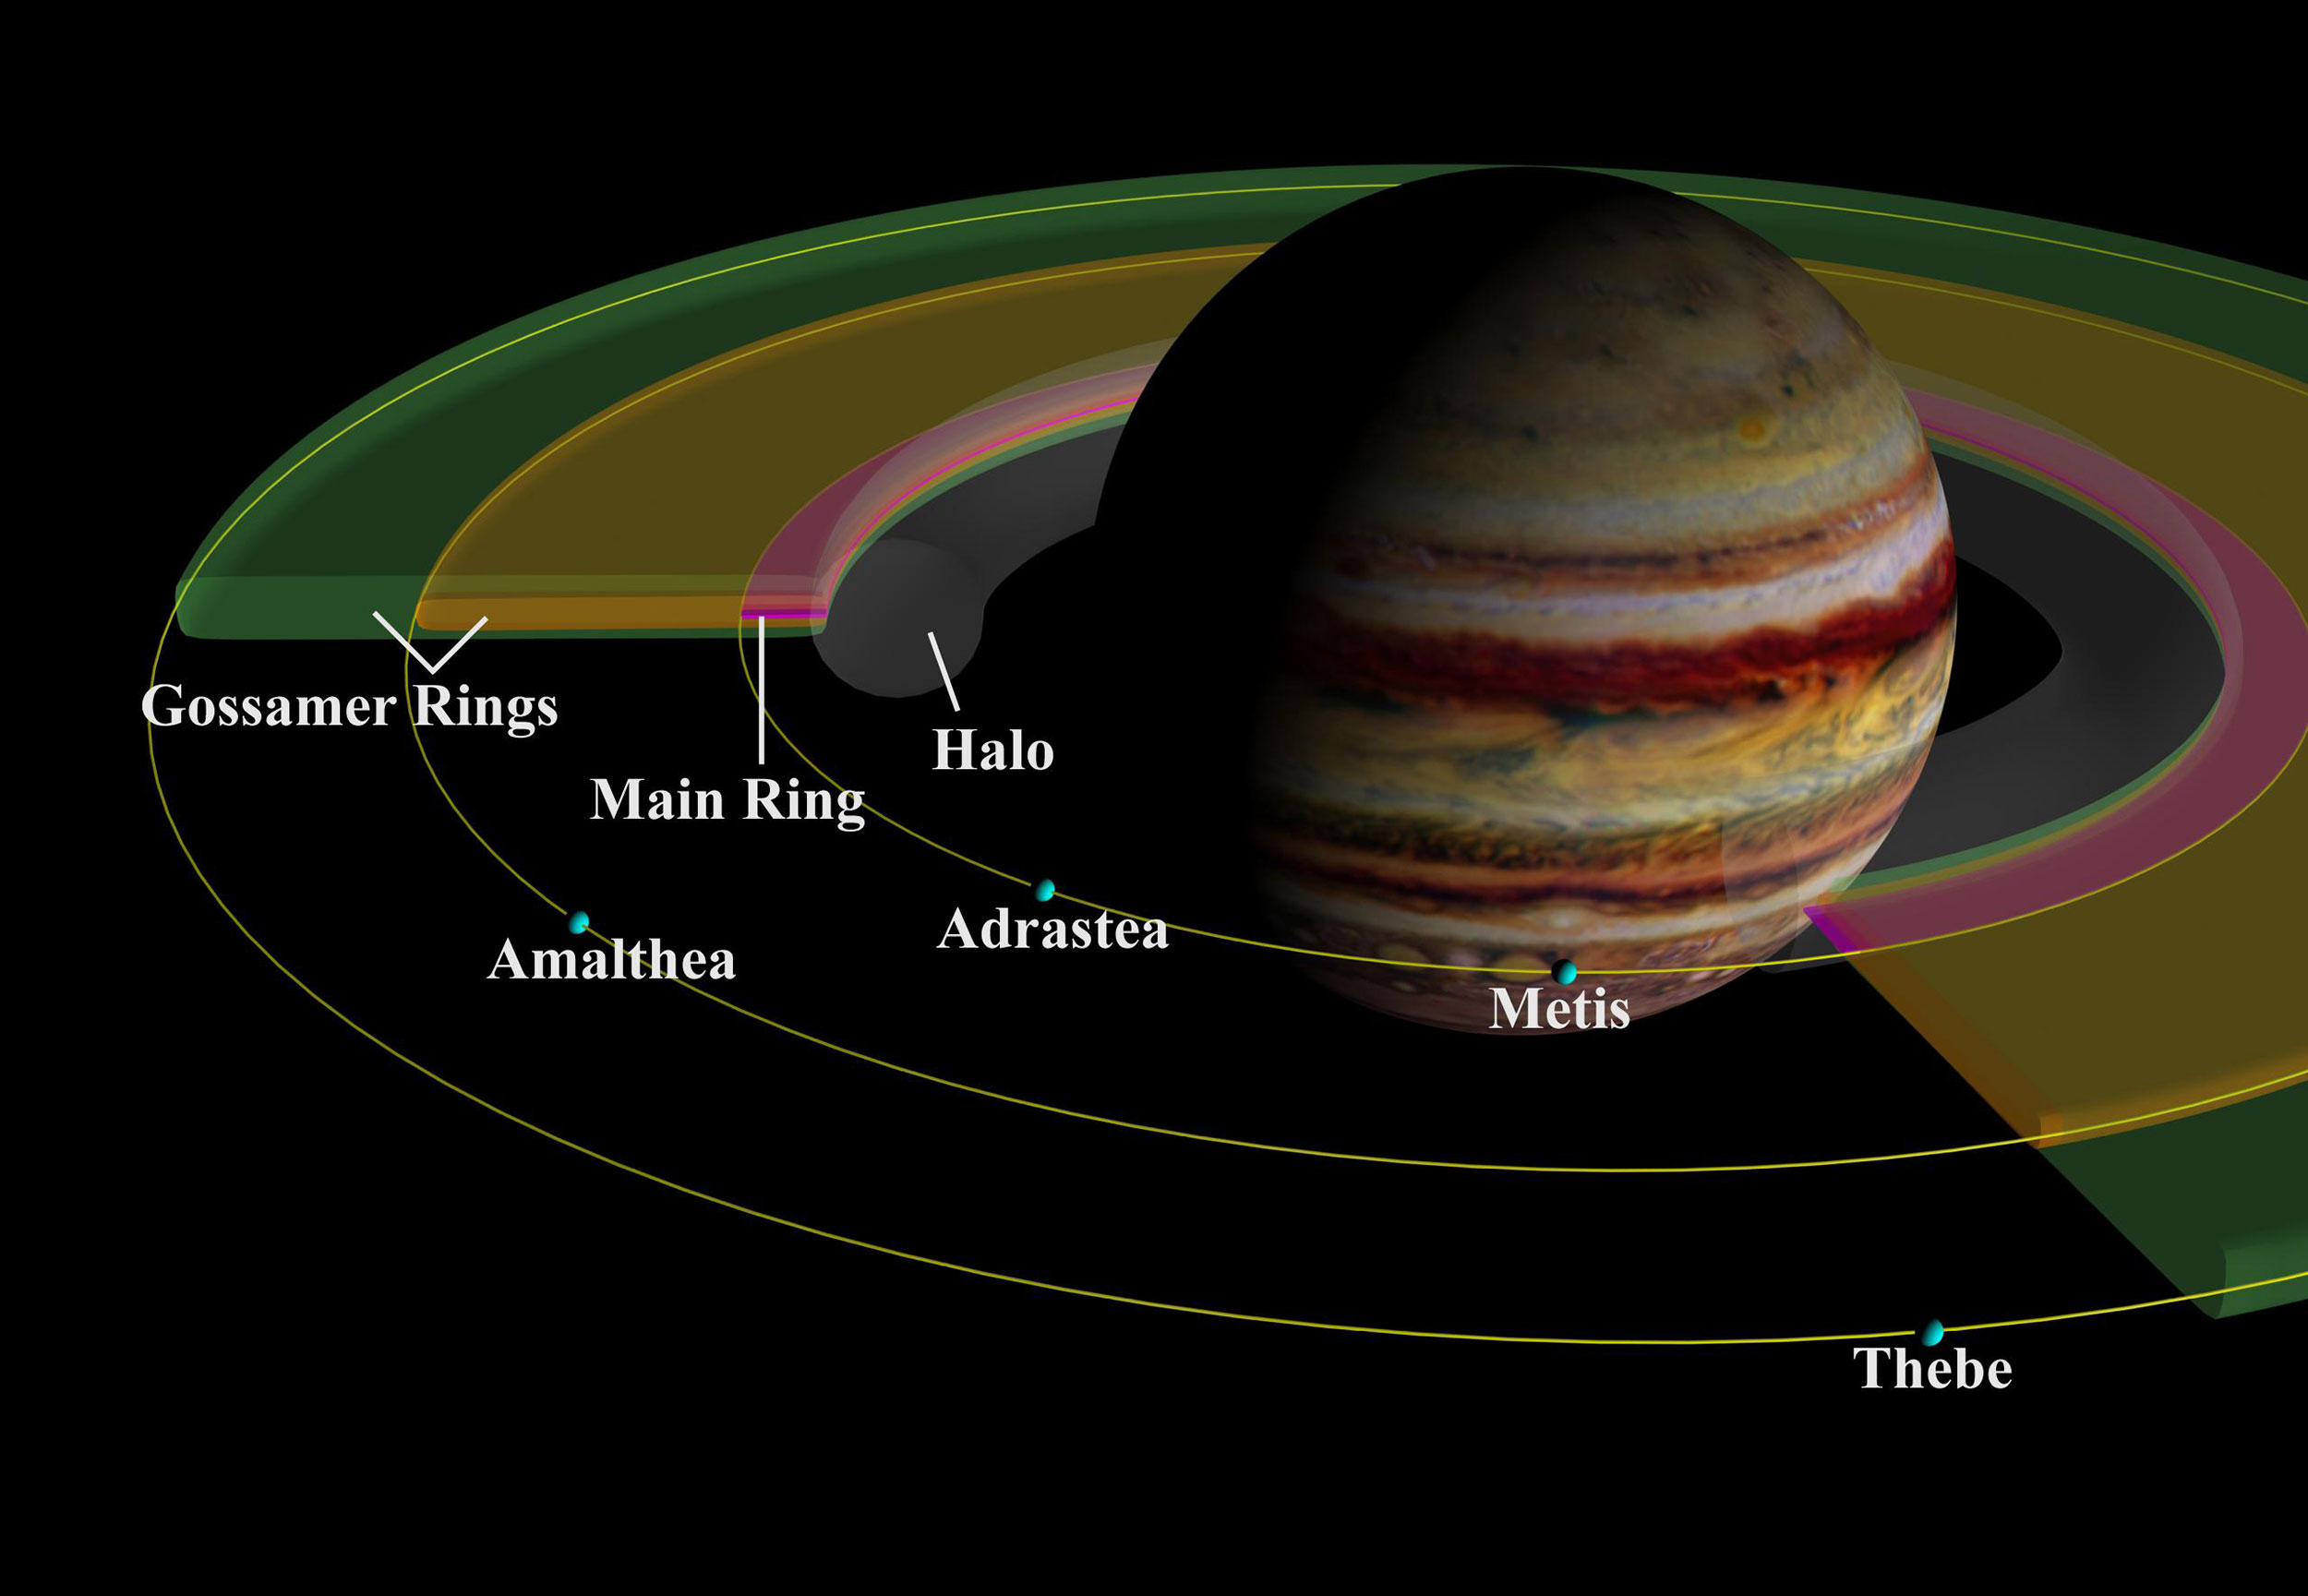 This schematic cut-away view of the components of Jupiter's ring system shows the geometry of the rings in relation to Jupiter and to the small inner satellites, which are the source of the dust which forms the rings. Credit: NASA/JPL/Cornell University